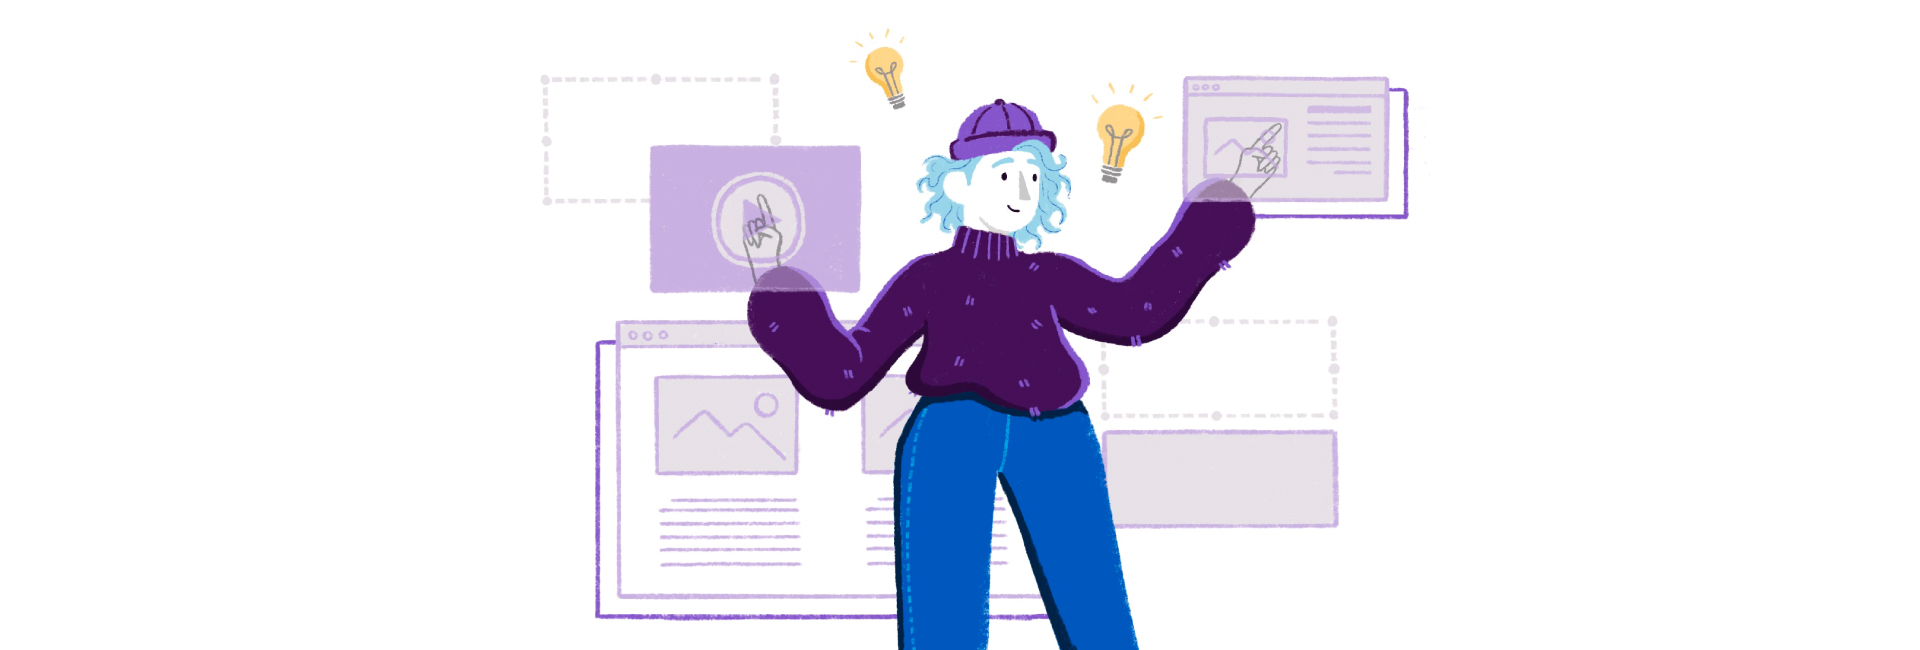 Illustration of person touching floating screens